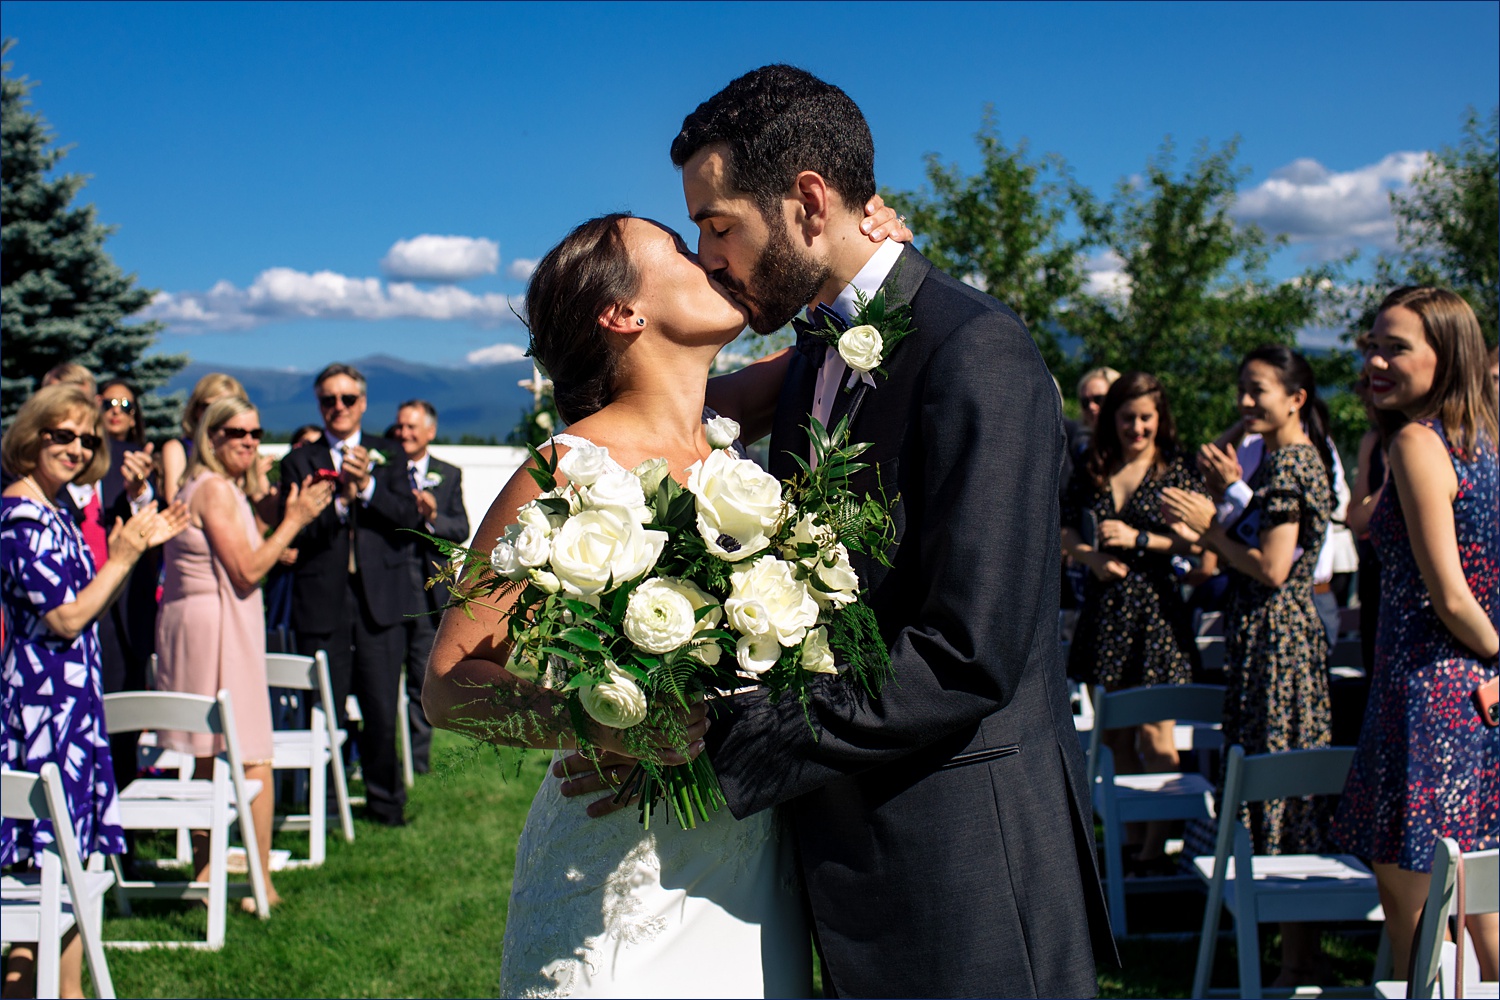 The bride and groom steal a kiss at the end of the aisle of their NH wedding day